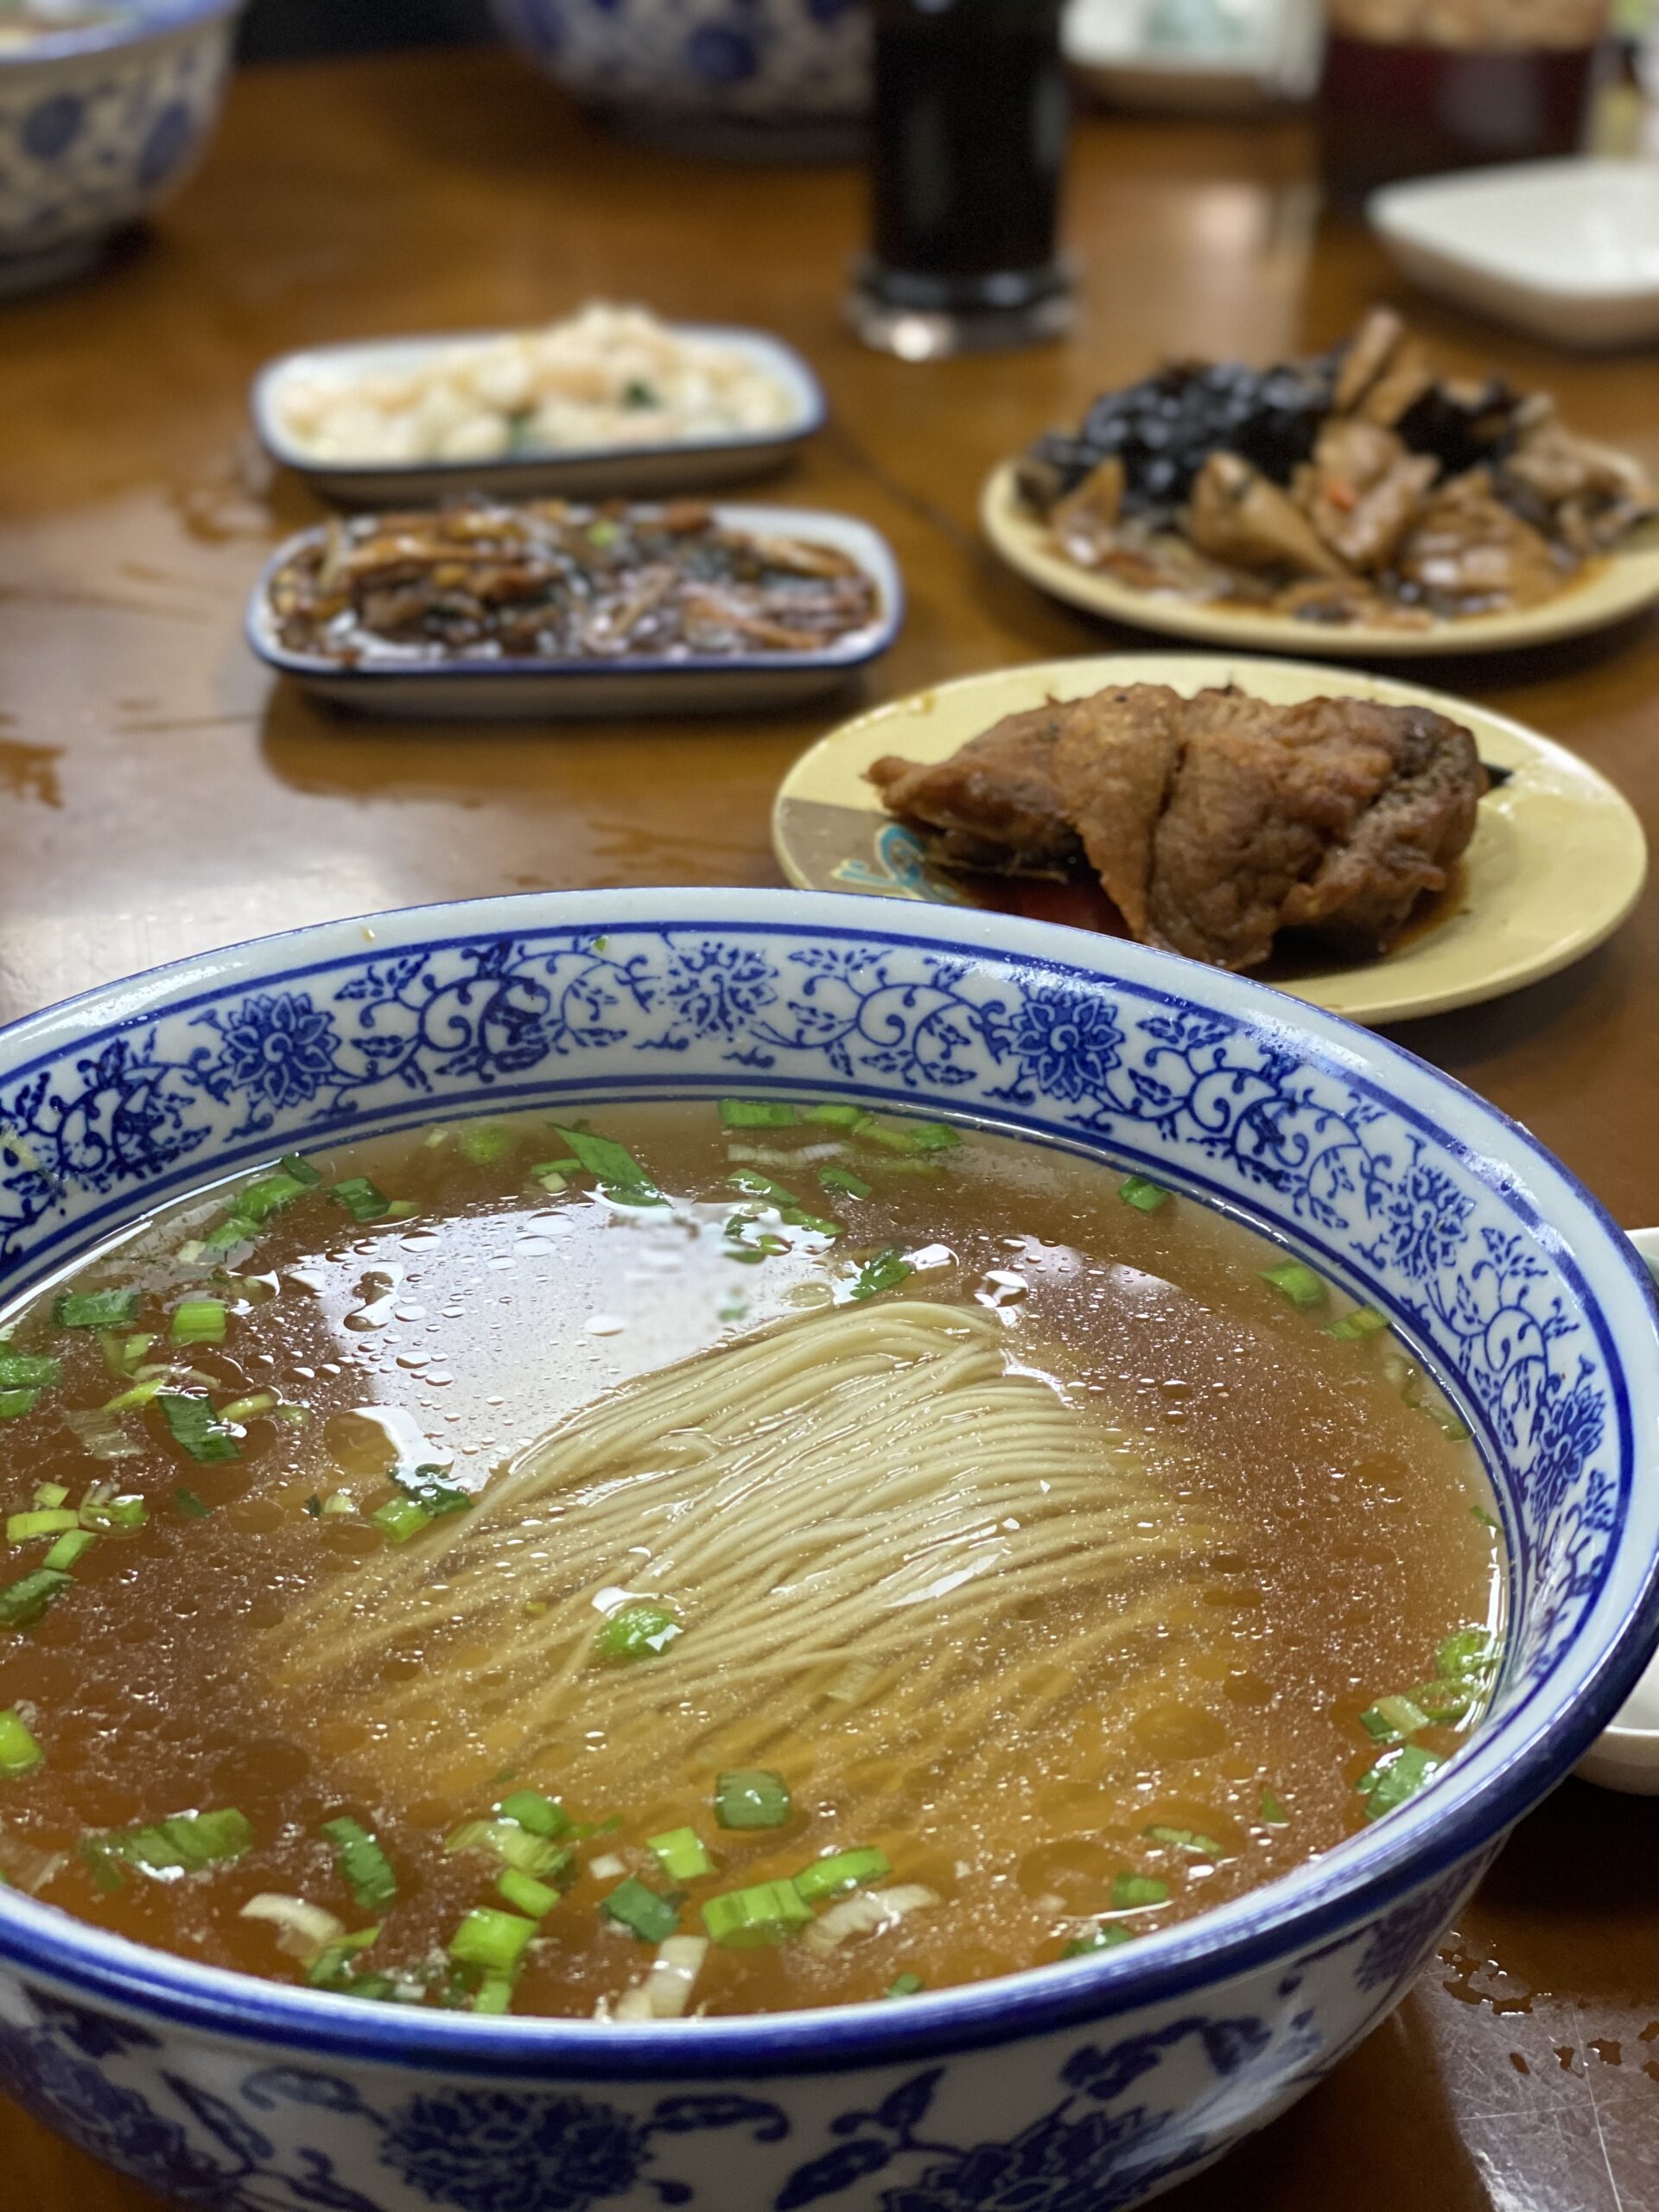 Discover New Flavours In Our Suzhou Alleyway Walking Food Tour